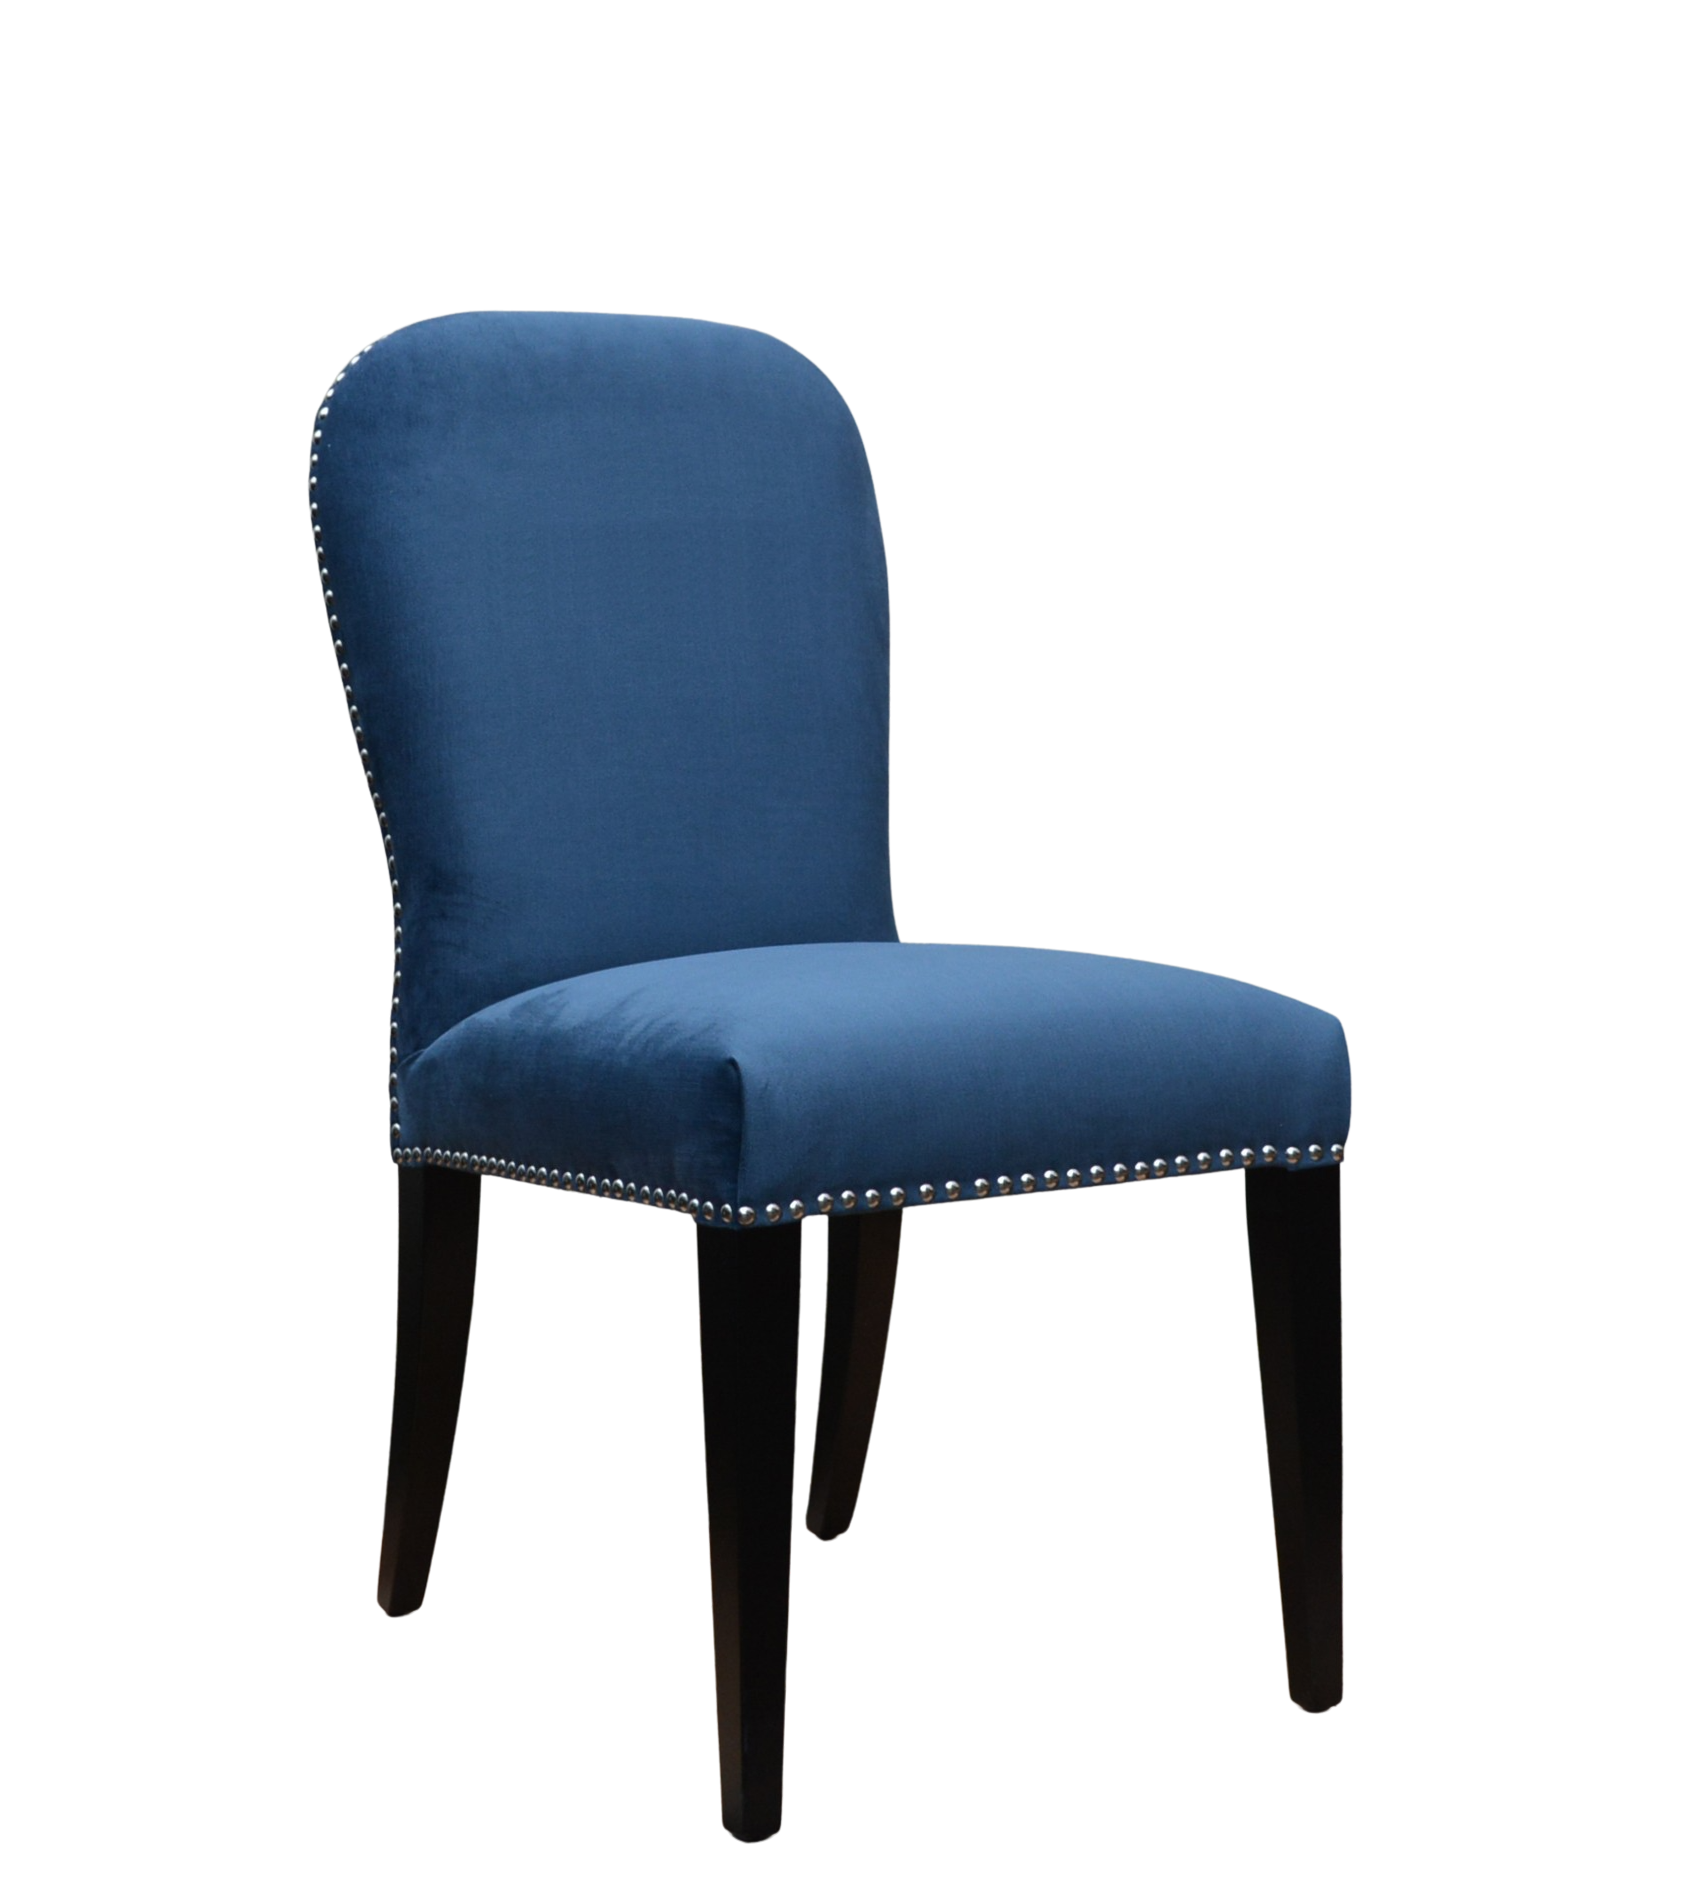 The Amelia Dining Chair